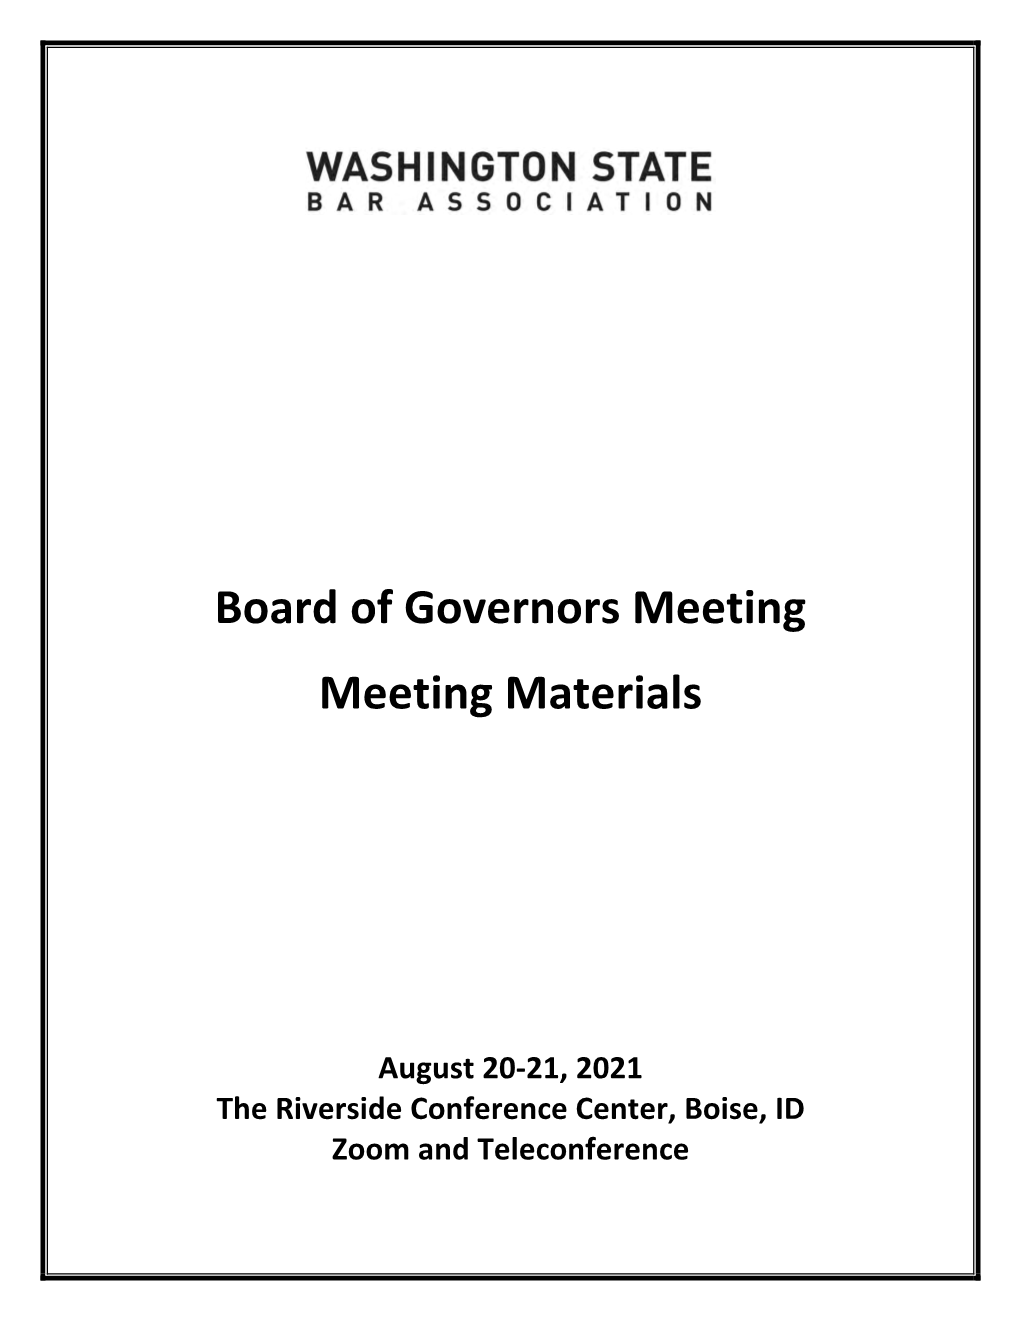 Board of Governors Meeting Meeting Materials